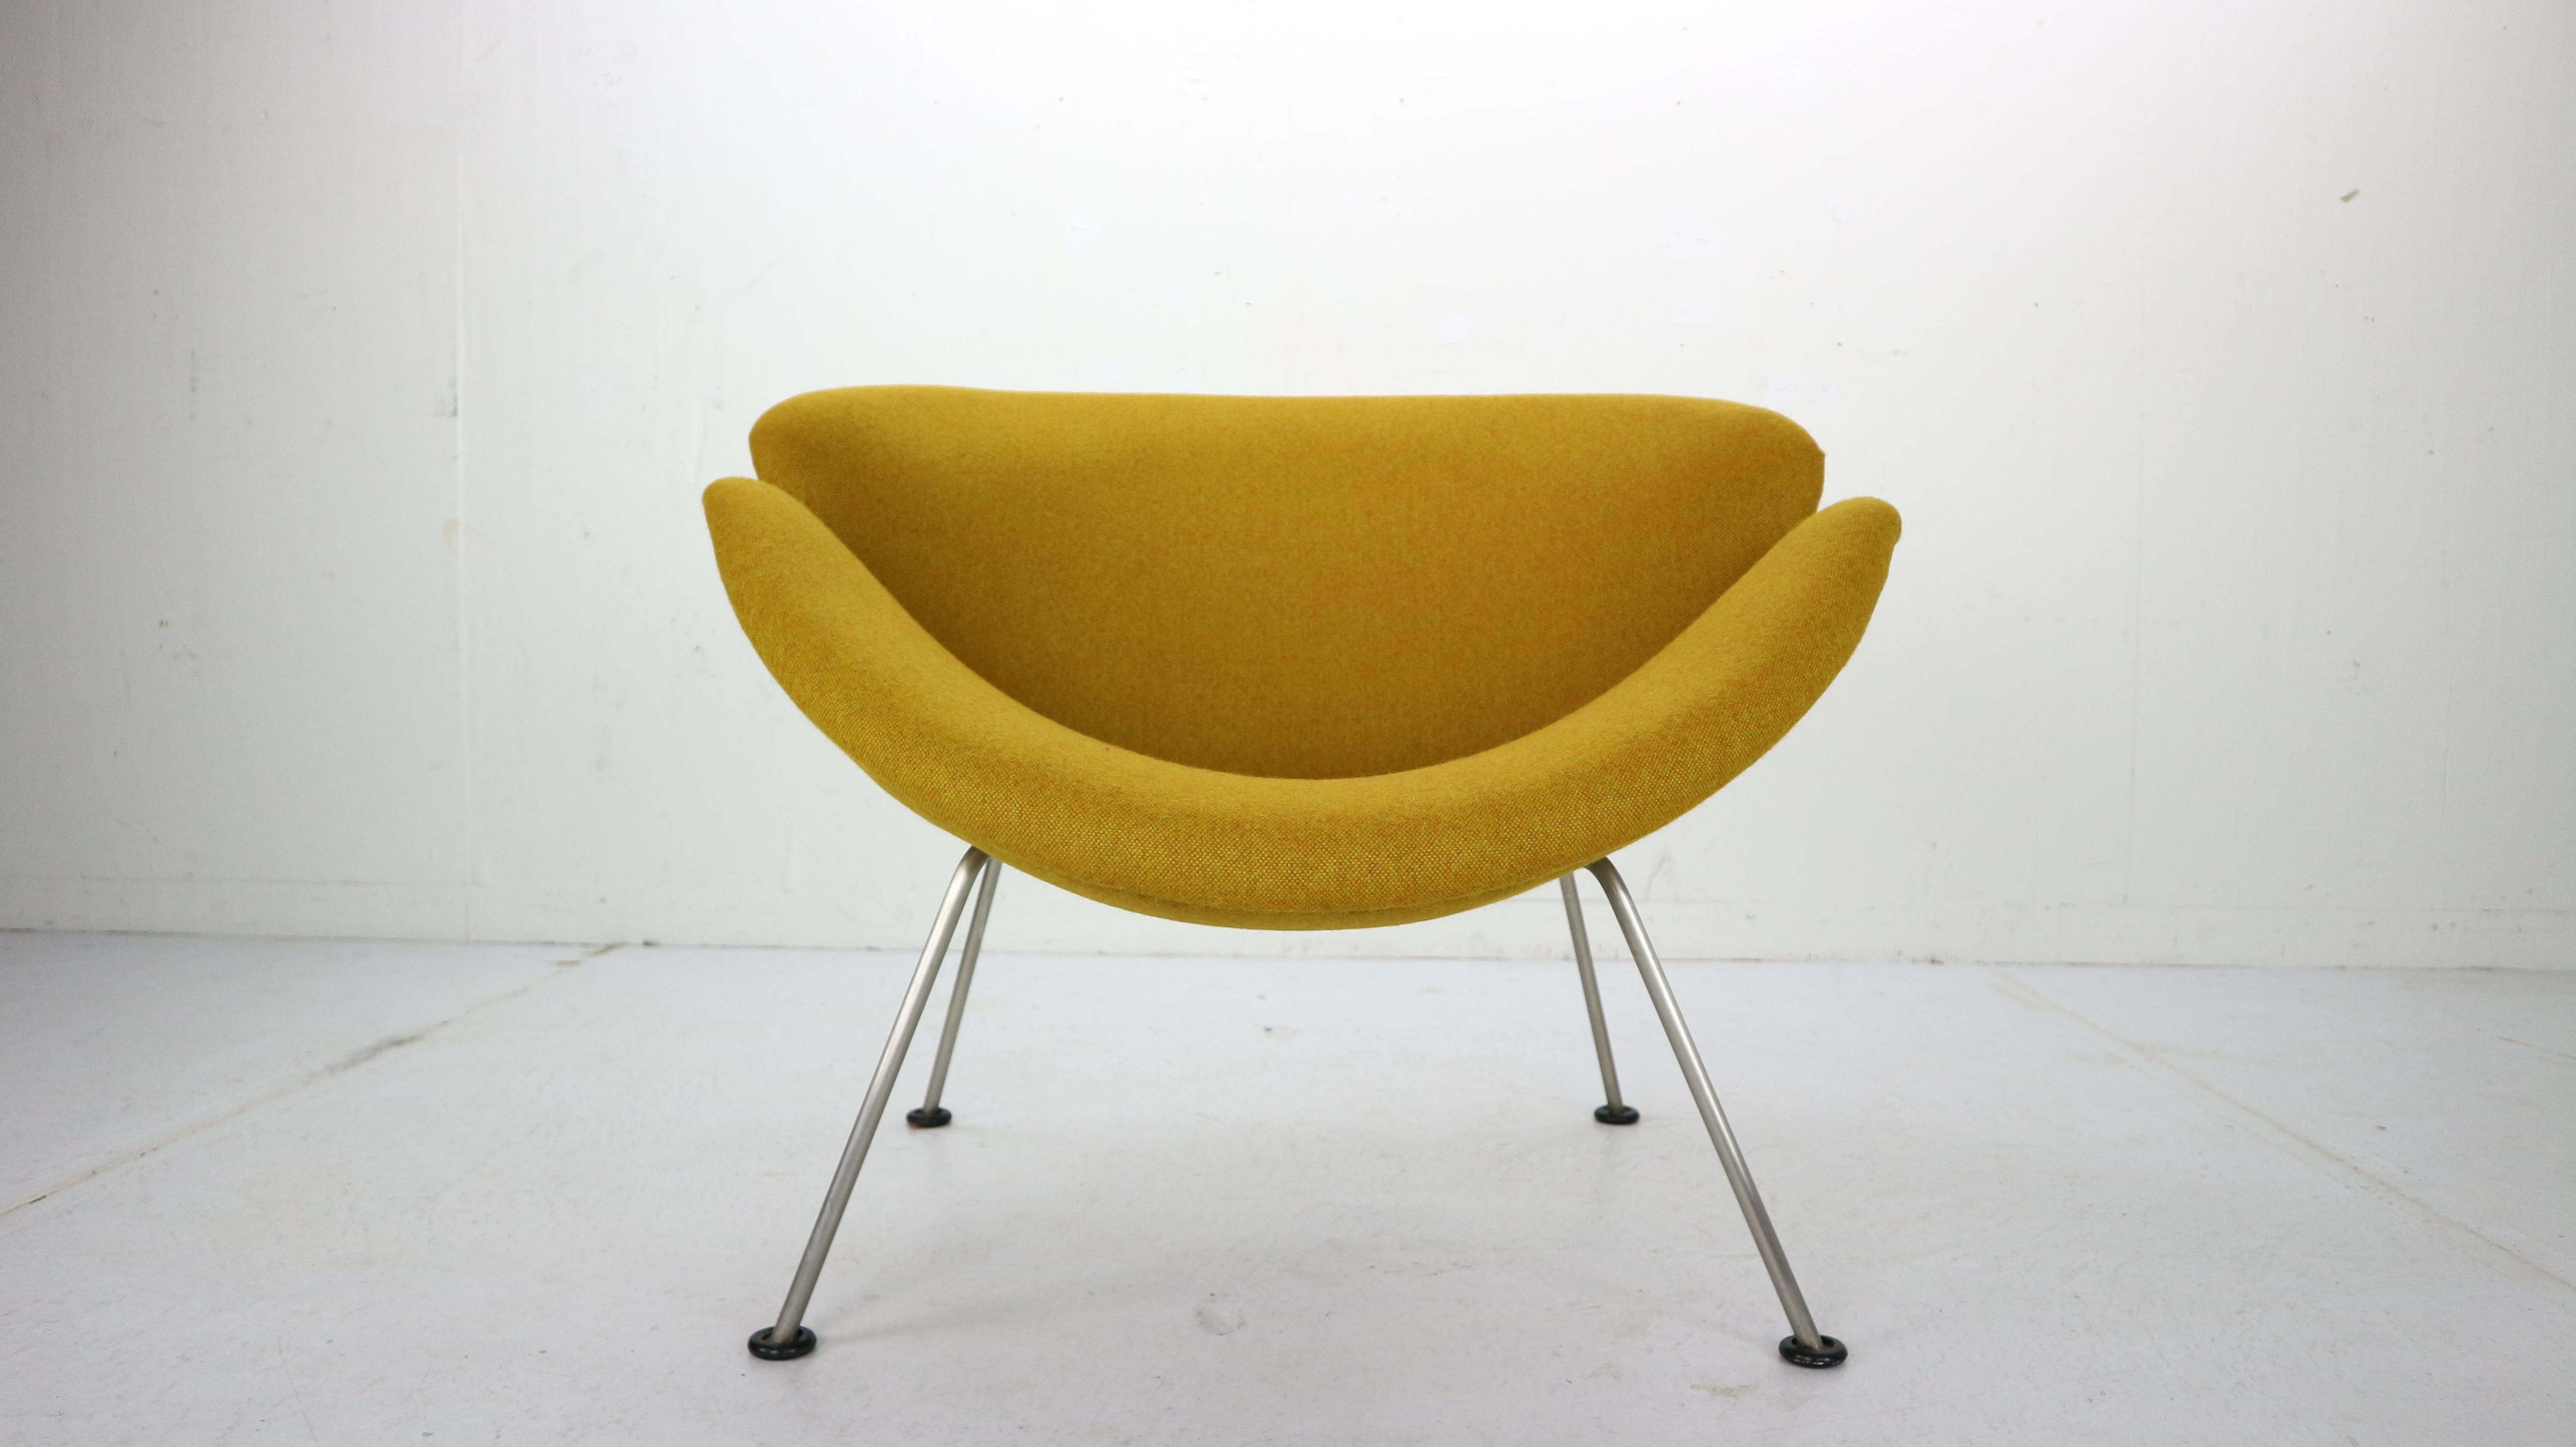 Lounge chair designed (early years) by Pierre Paulin for Artifort manufacture, 1960s period, Holland.
The model of the chair is called “Orange Slice